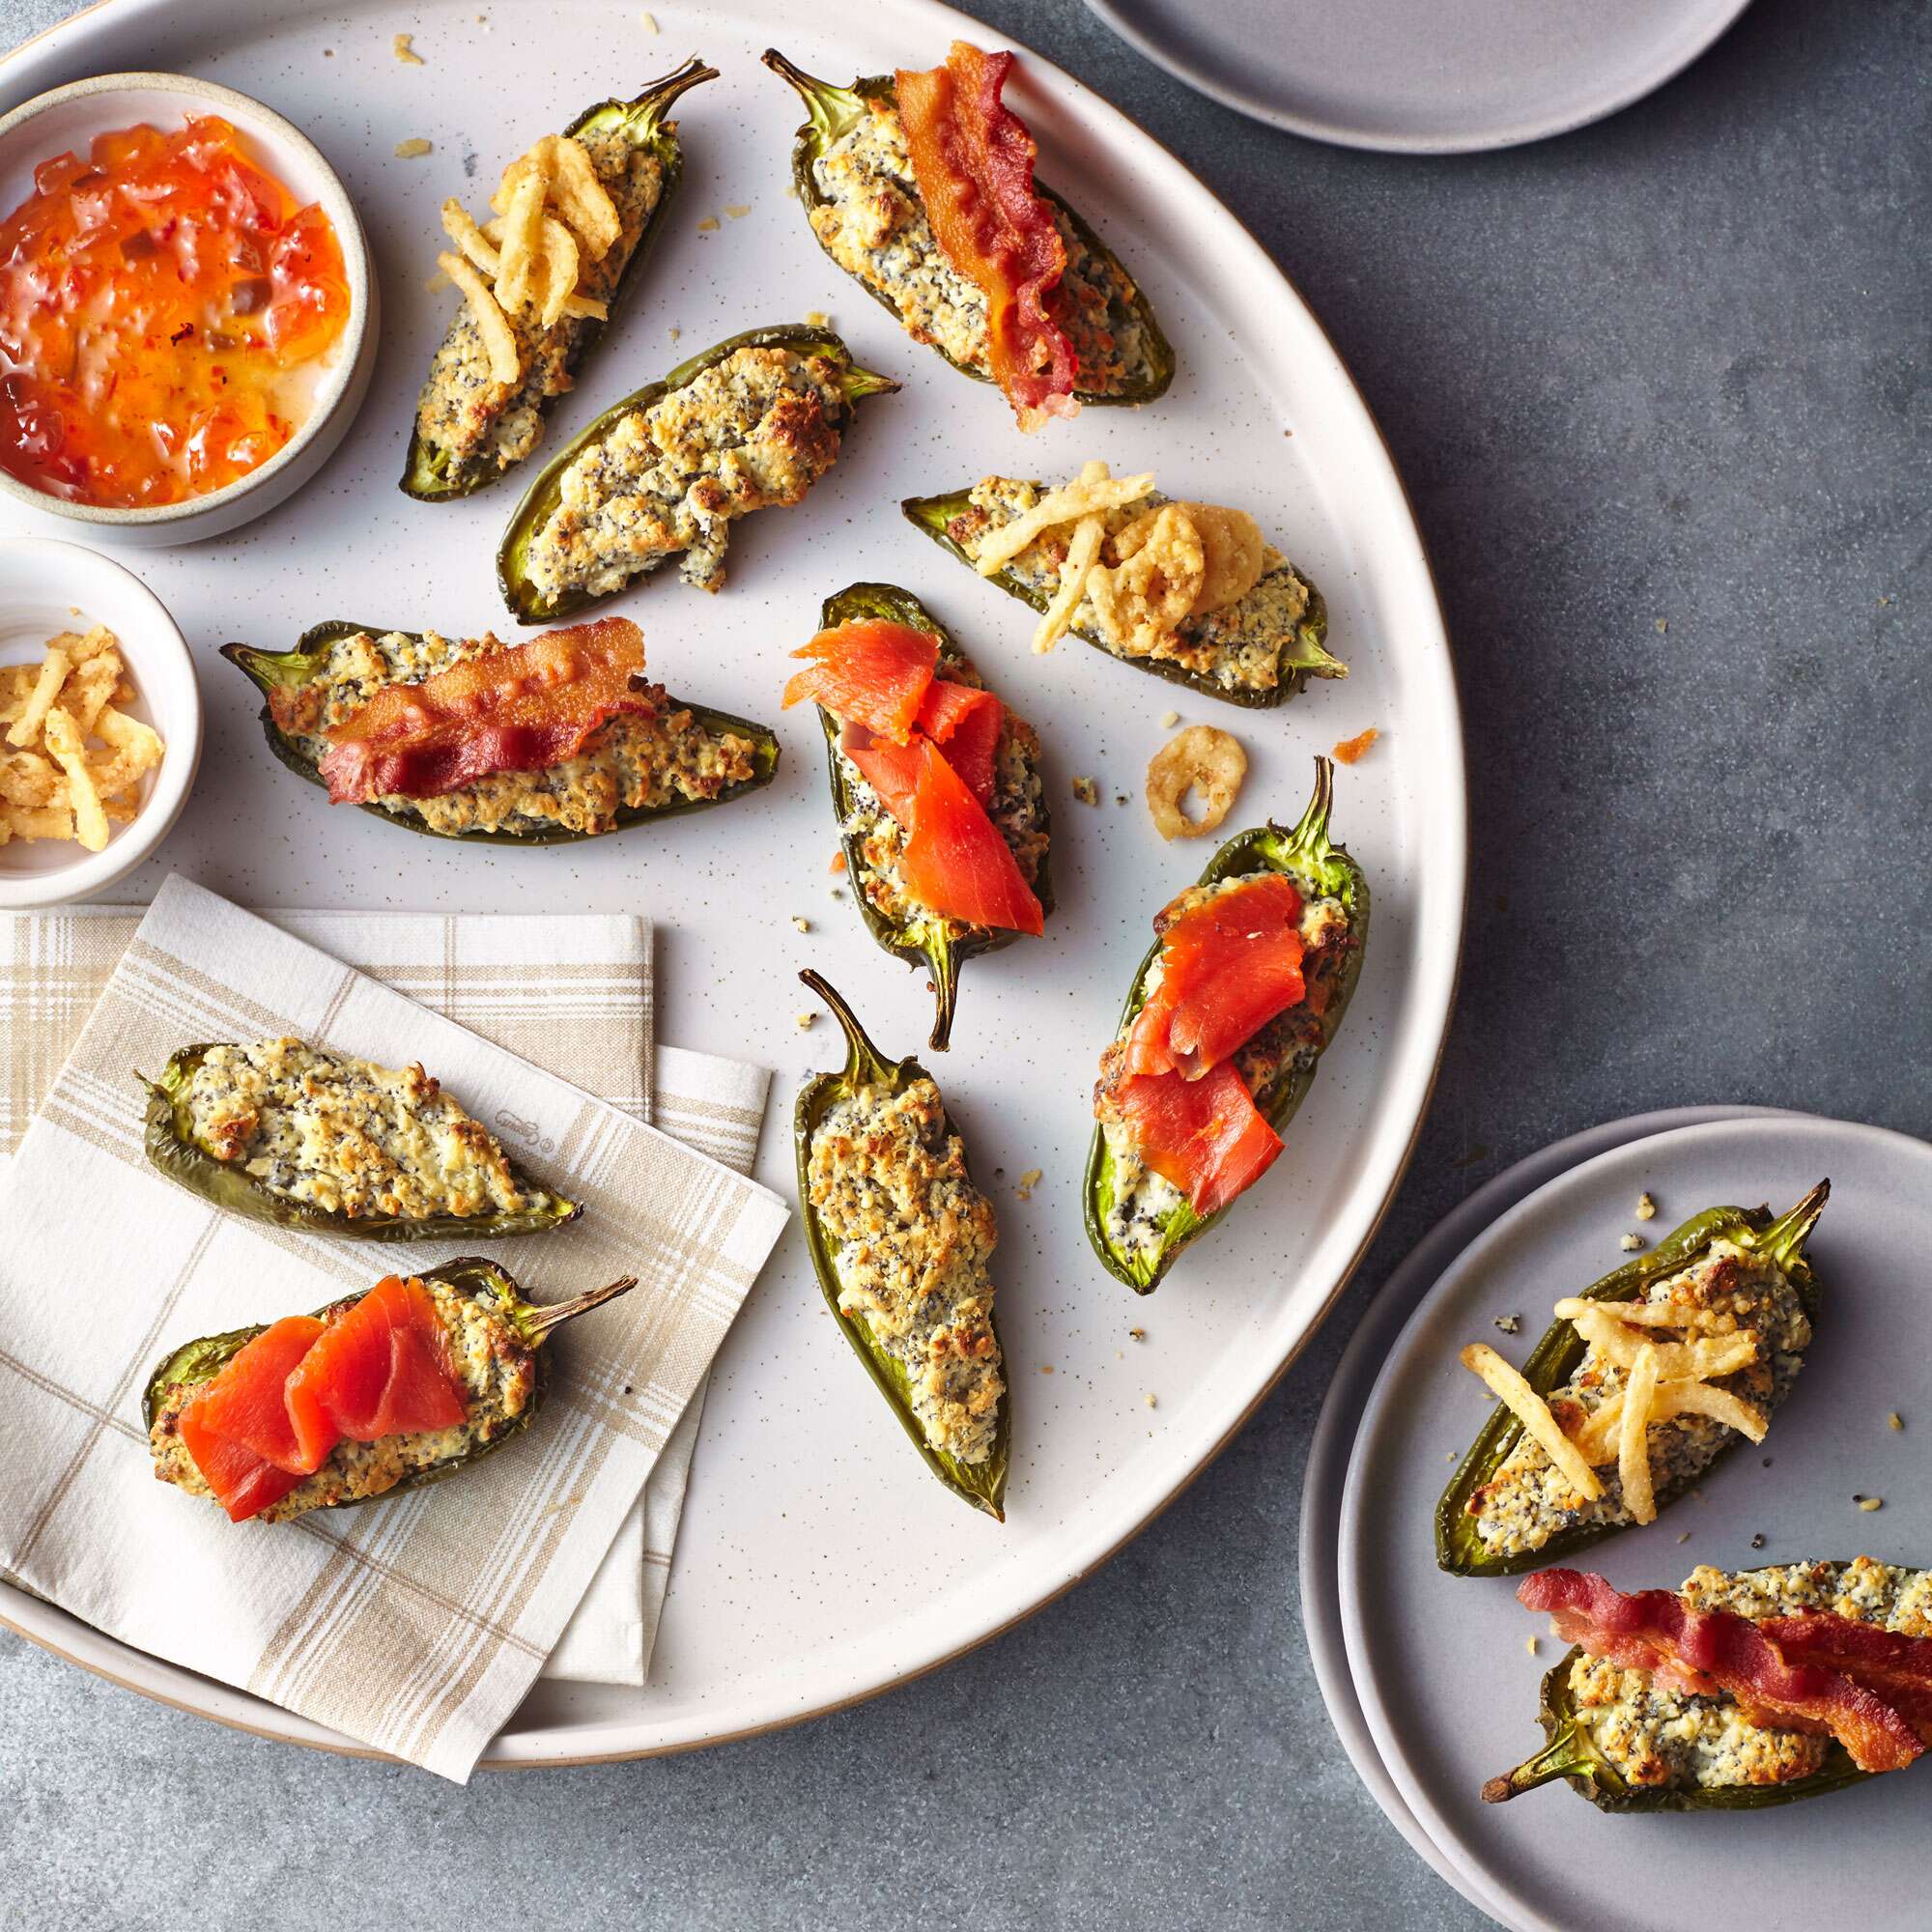 32 No-Cook Appetizers That Make Entertaining Quick and Easy